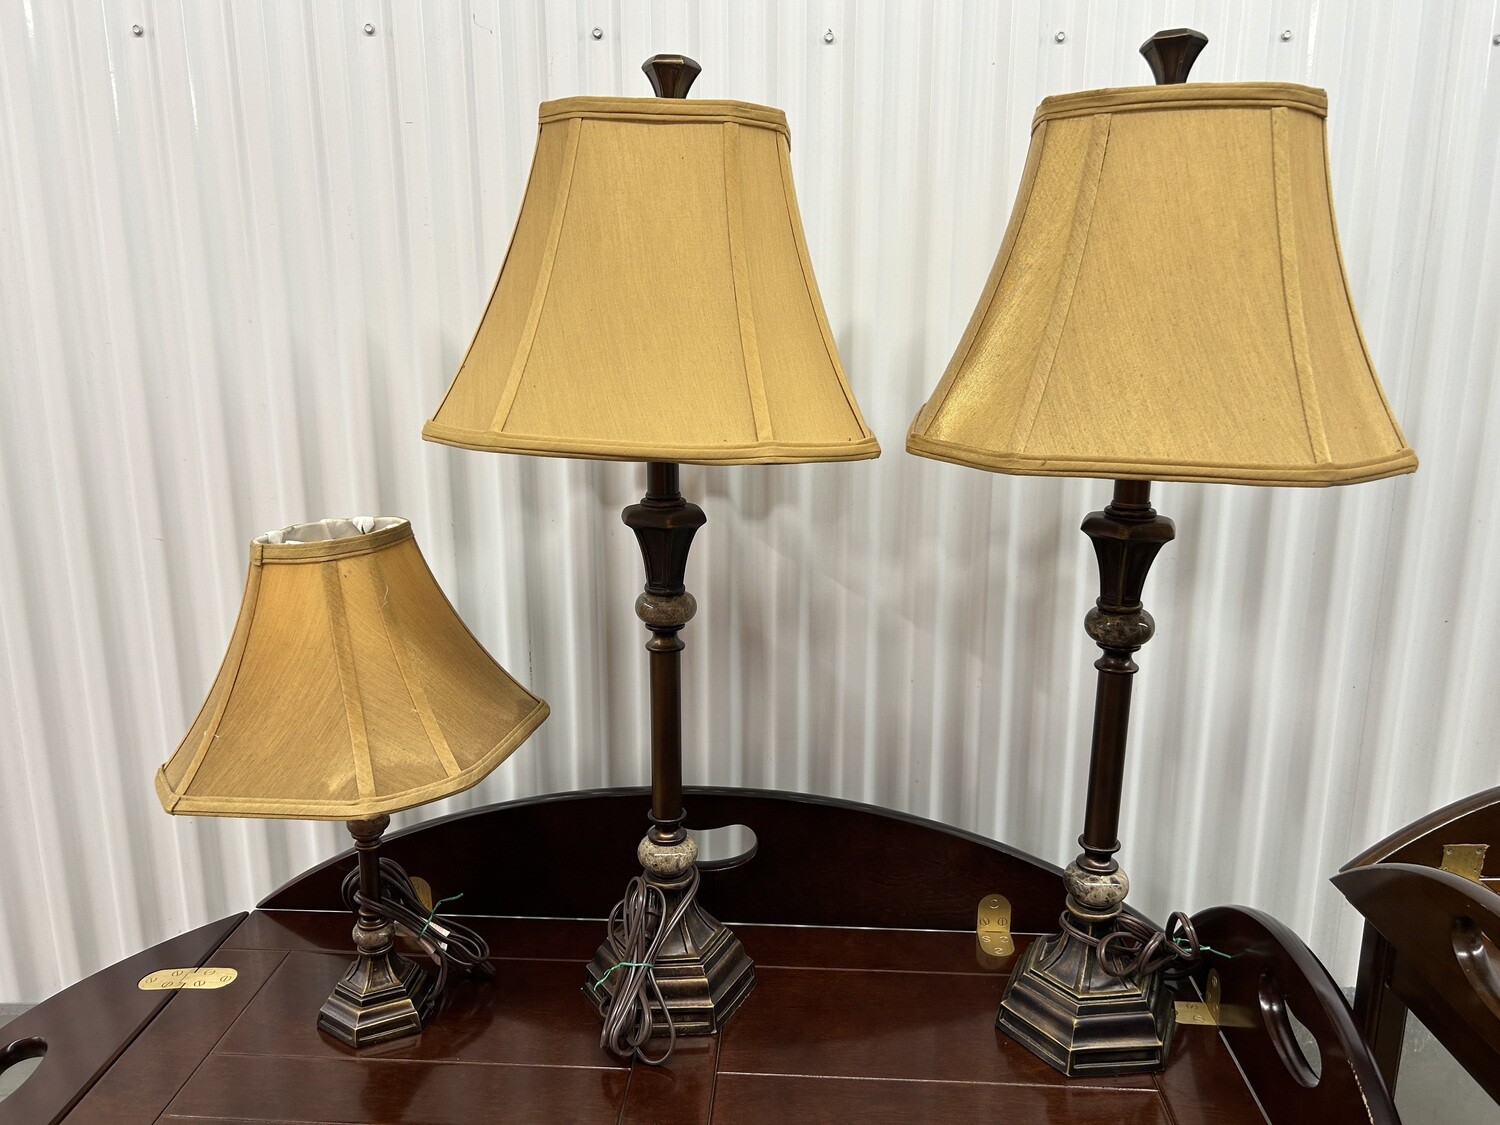 Set of 3 Lamps, marble trim #2213